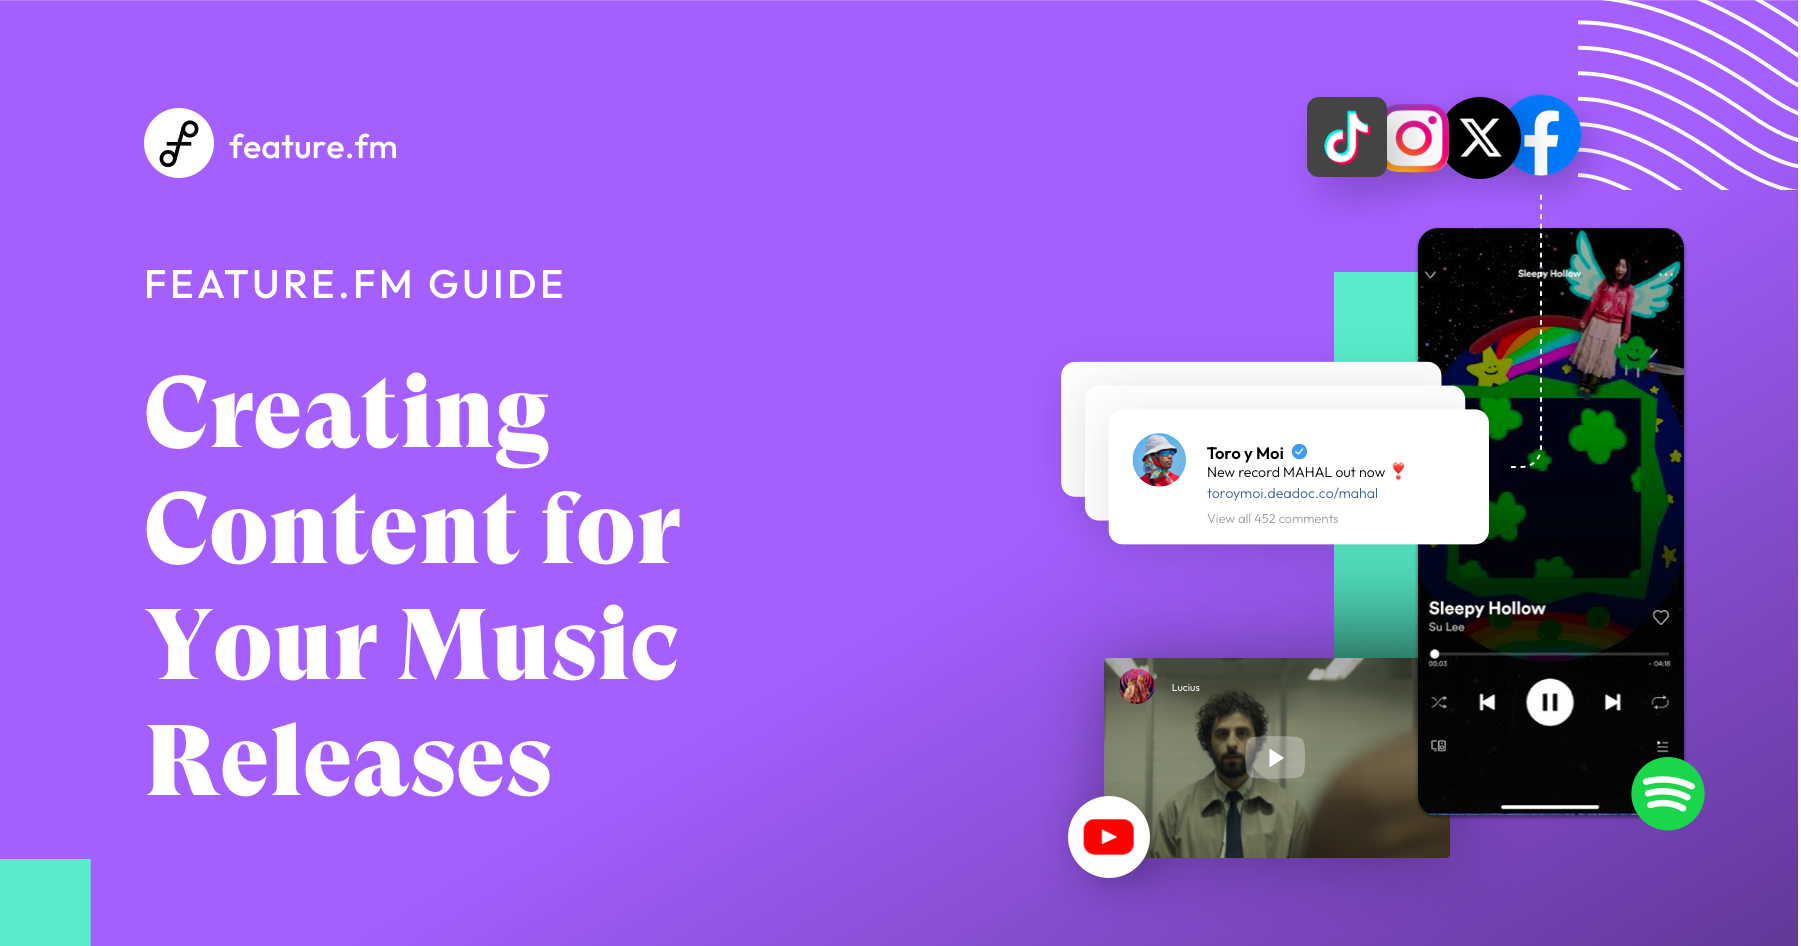 The Guide to Creating Content for Your Music Releases, Pre-Saves and Smart Links